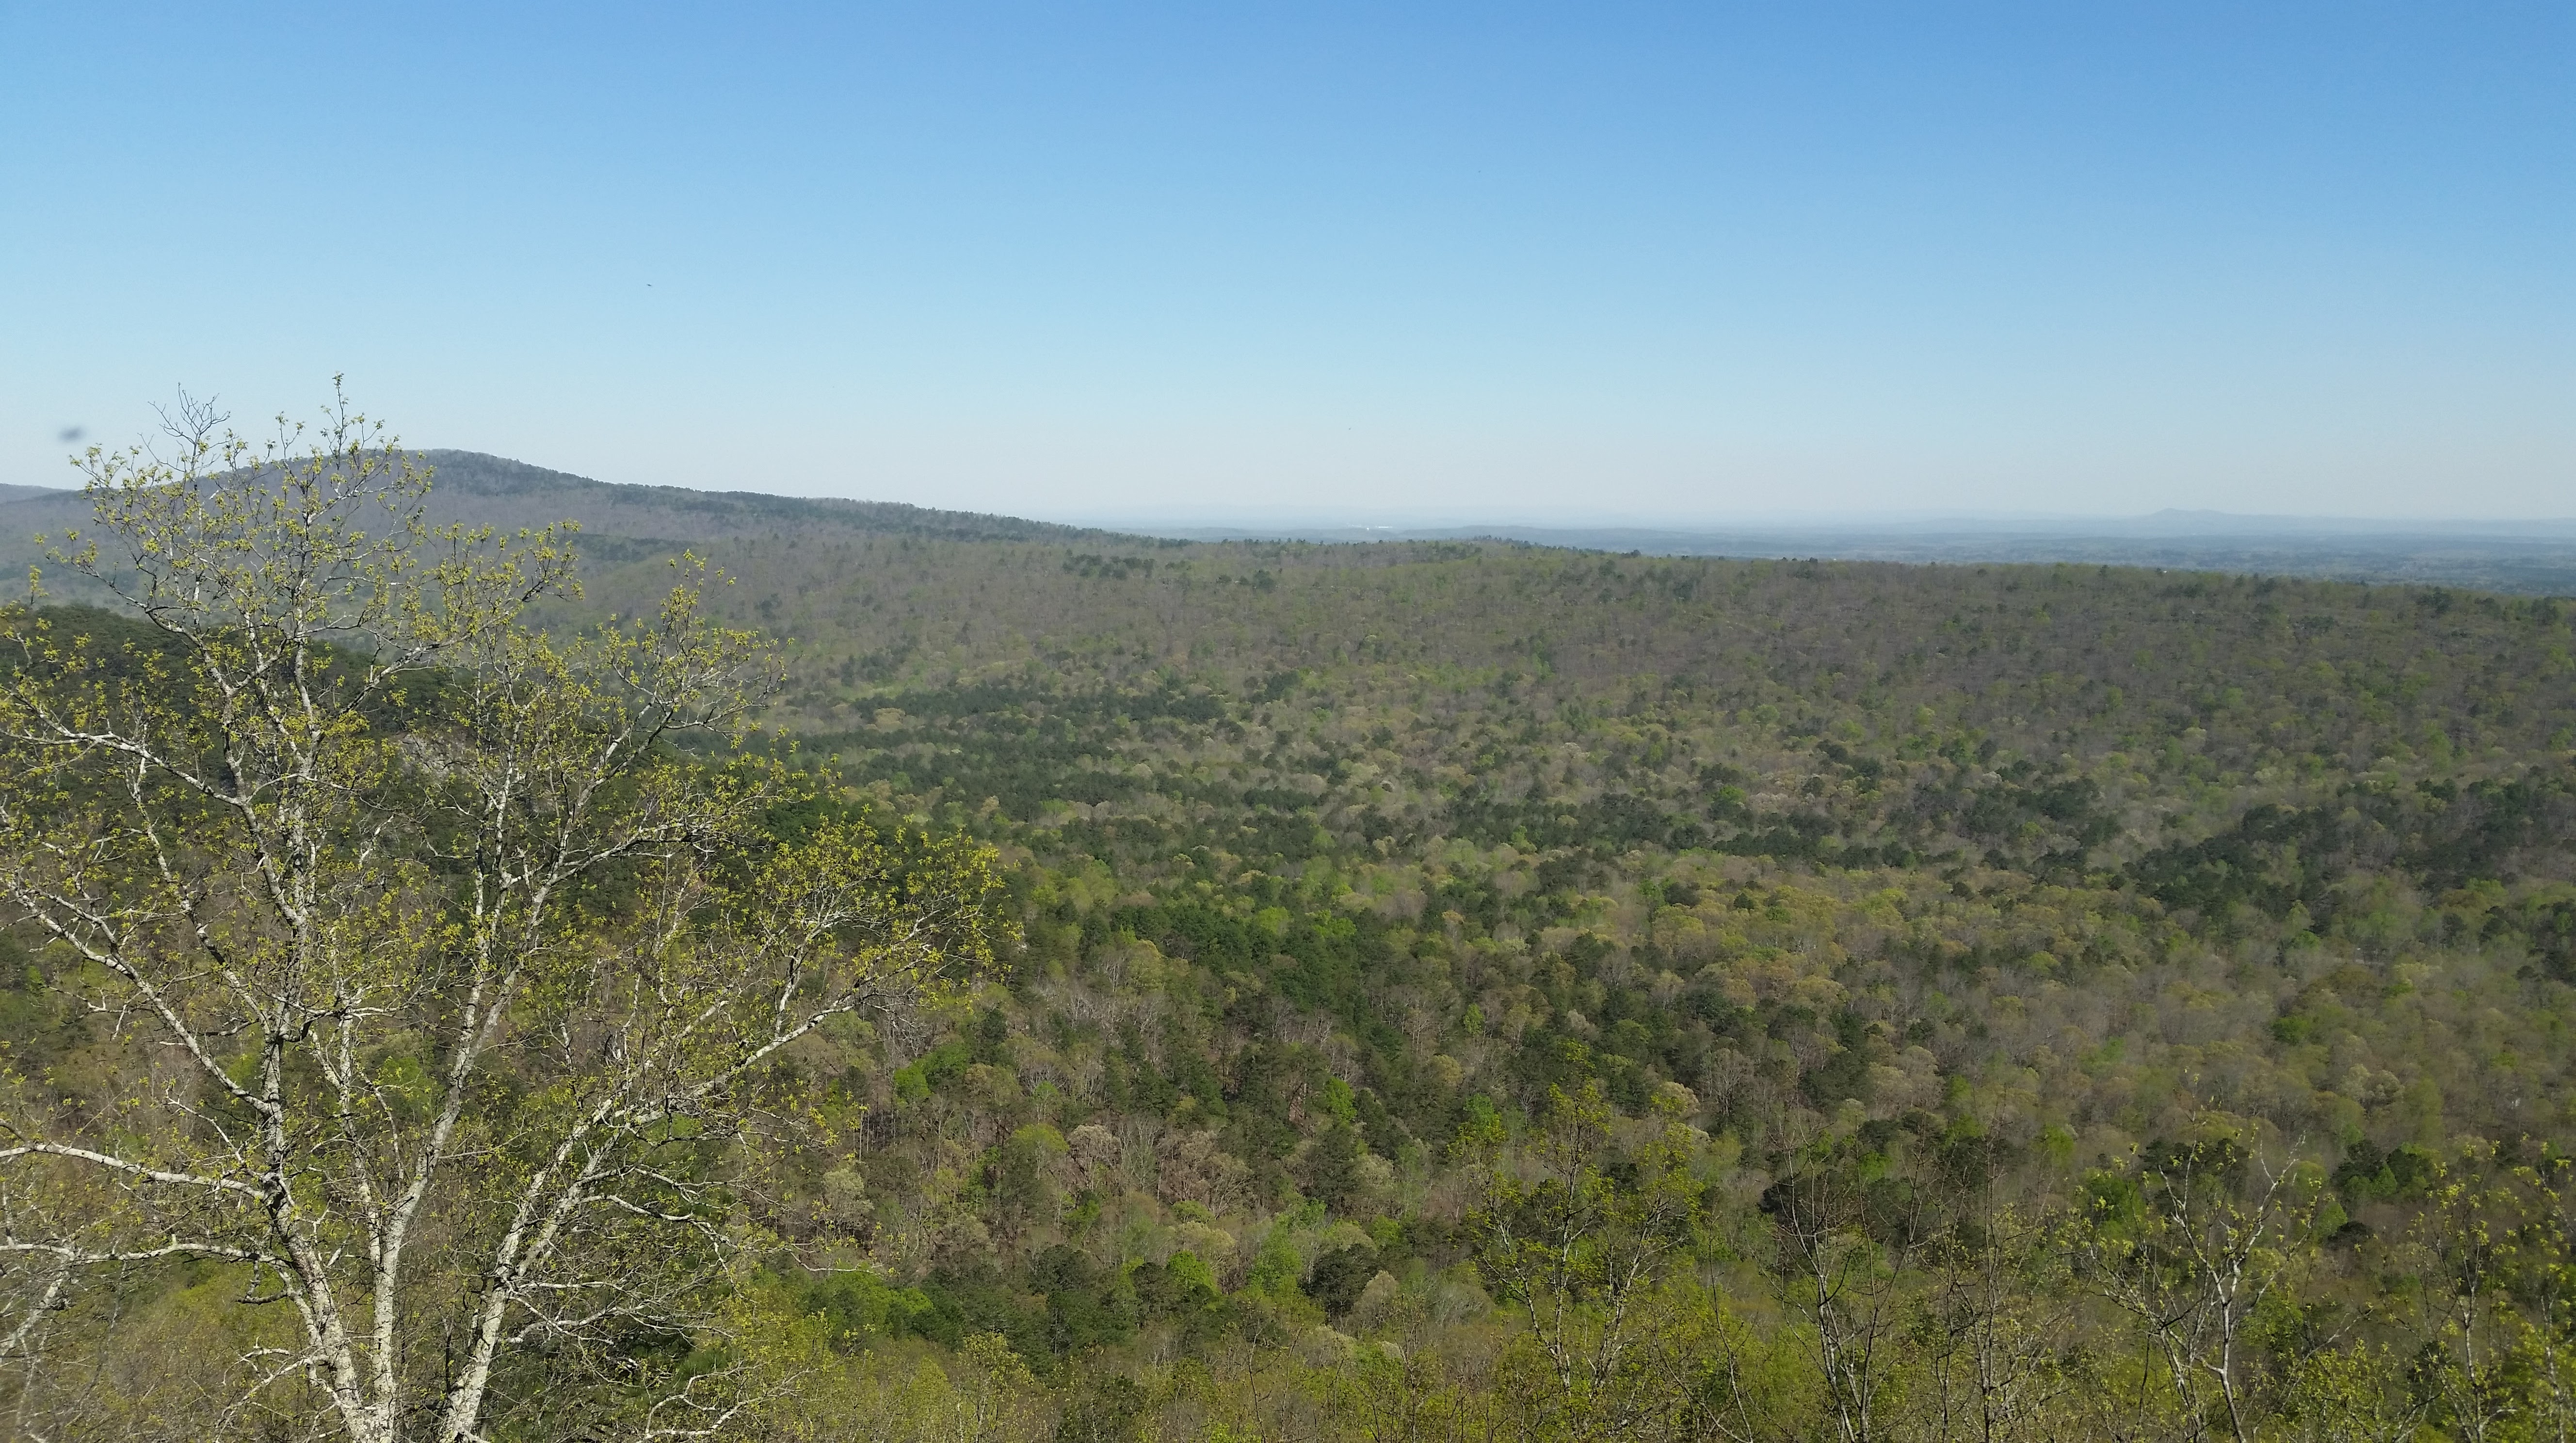 View looking back in the general direction of Clemson beyond Signal Mountain - far beyond the horizon visible in this pic.